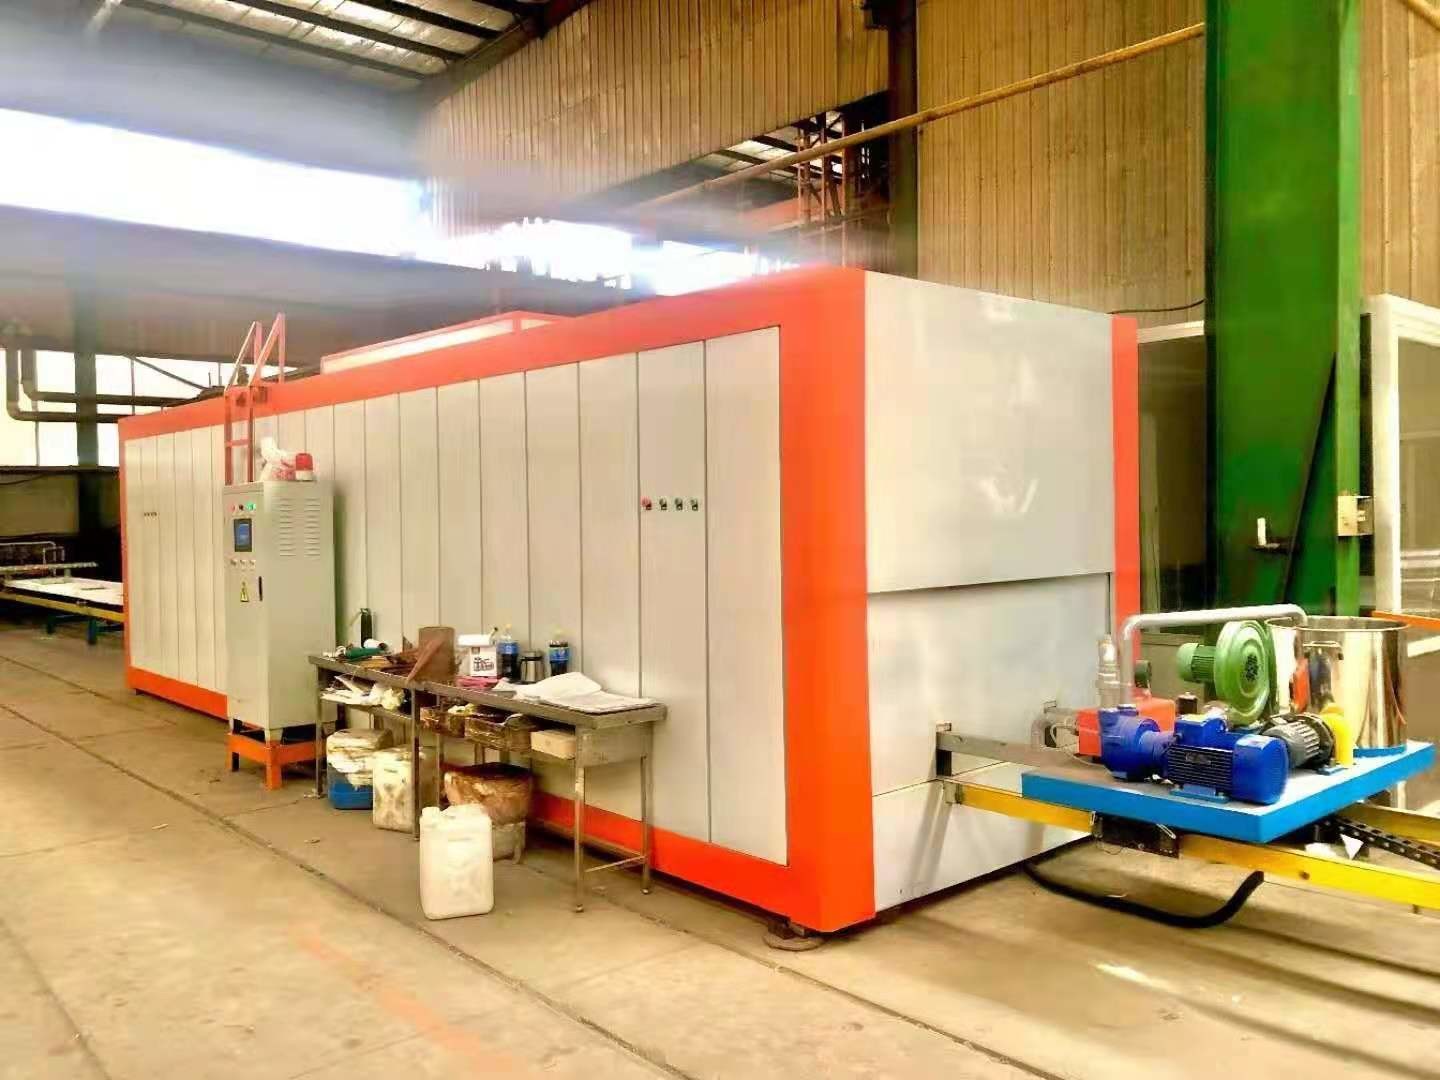 Quality Automatic Grain Heat Wooden Transfer Equipment 7.5KW Aluminum for sale